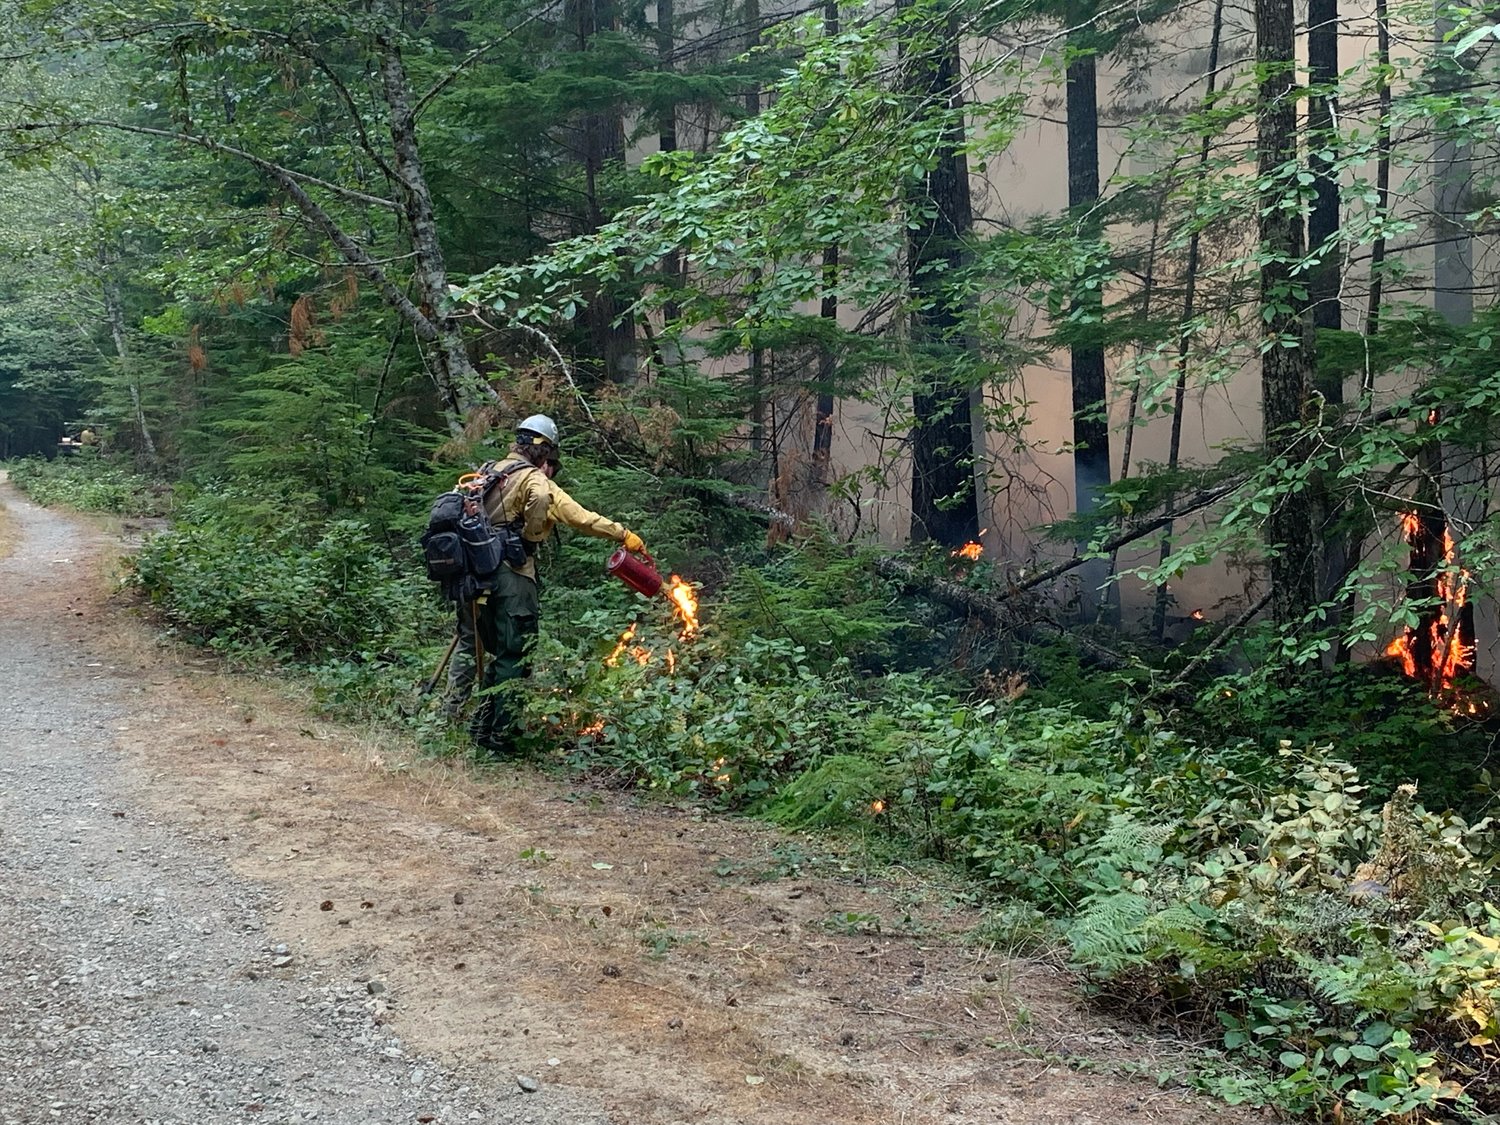 Firefighters conduct burn operations on the Goat Rocks Fire near Packwood Wednesday in this photo provided by the Gifford Pinchot National Forest.